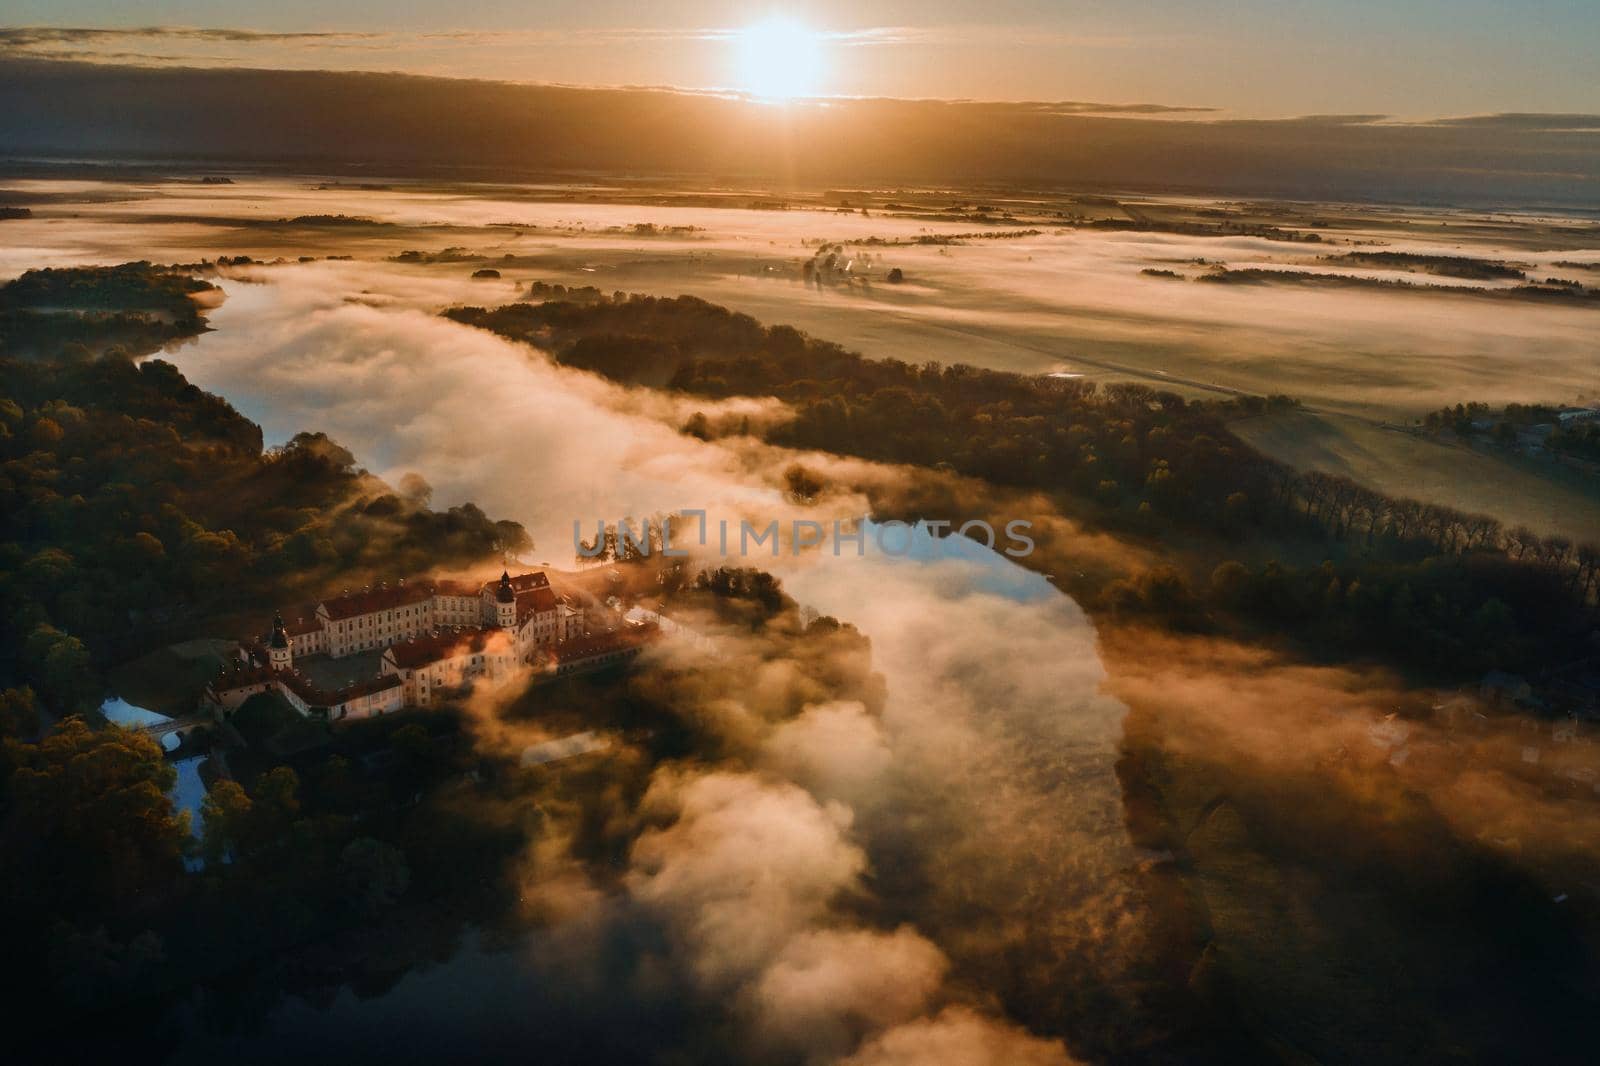 Nesvizh castle is a residential castle of the Radziwill family in Nesvizh, Belarus, with a beautiful view from above at dawn.